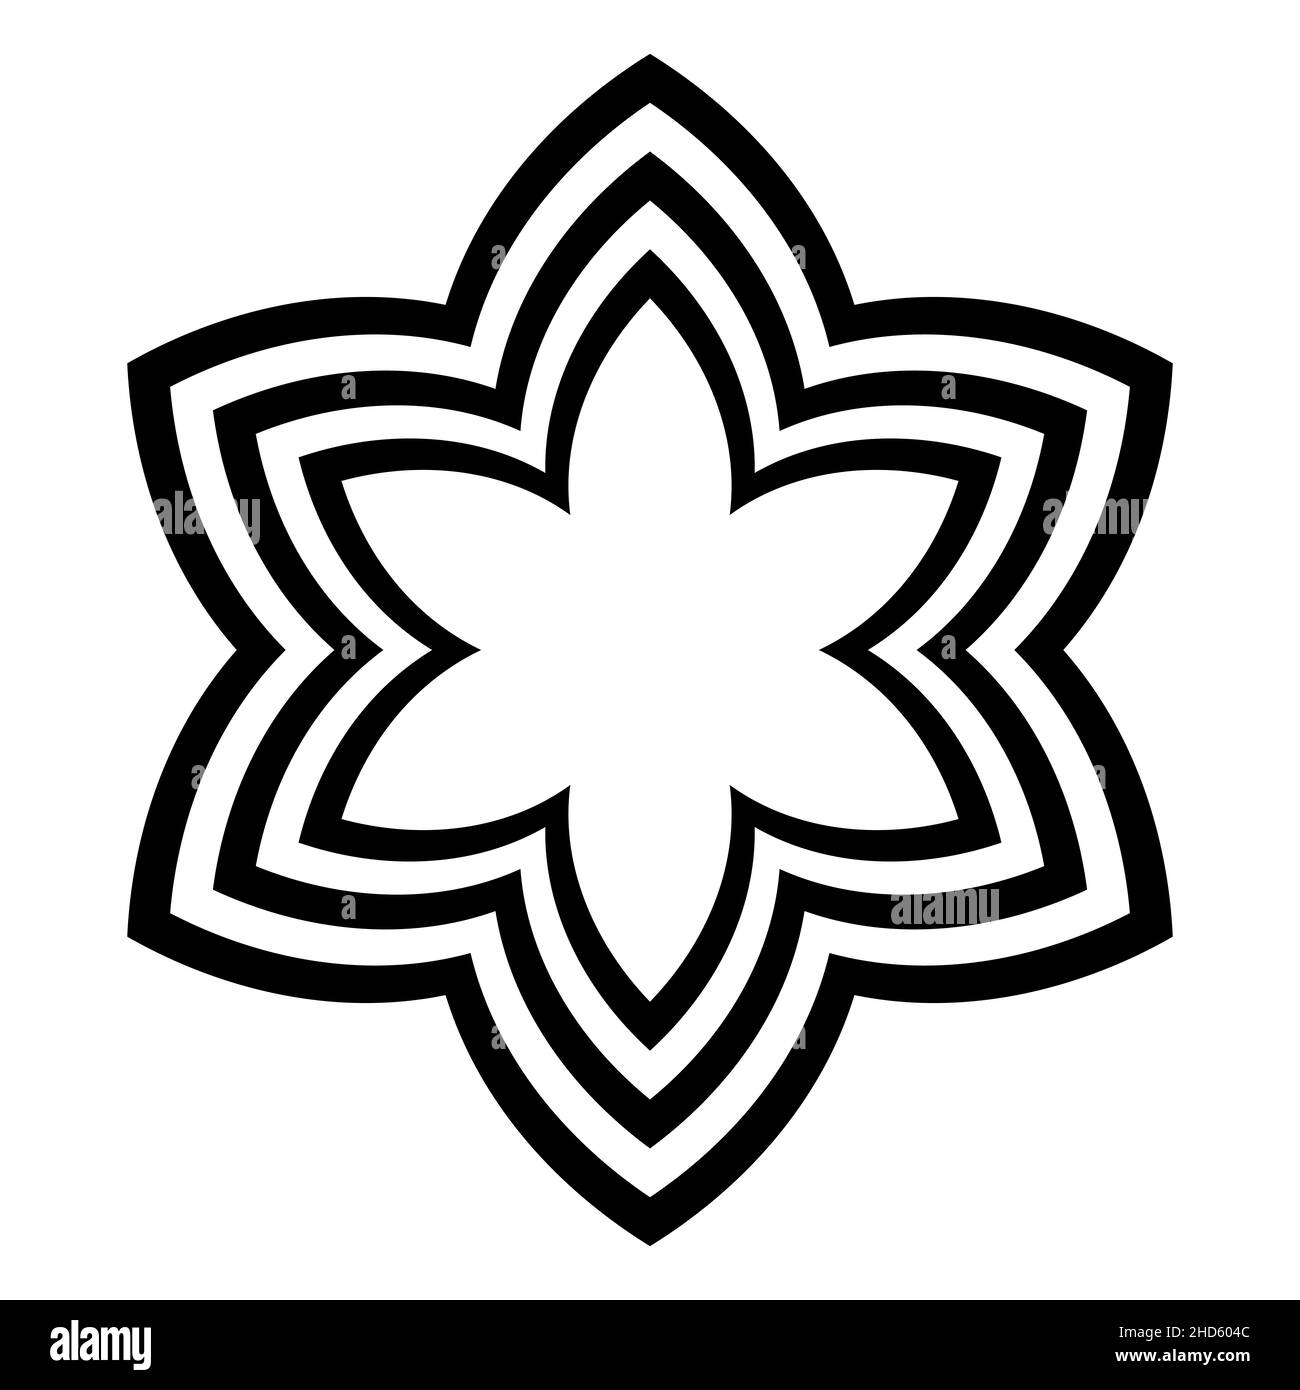 Six pointed star symbol, with arched offset lines. Three bold lines, curved like lancet arches, forming a pictogram, in the shape of a blossom. Stock Photo